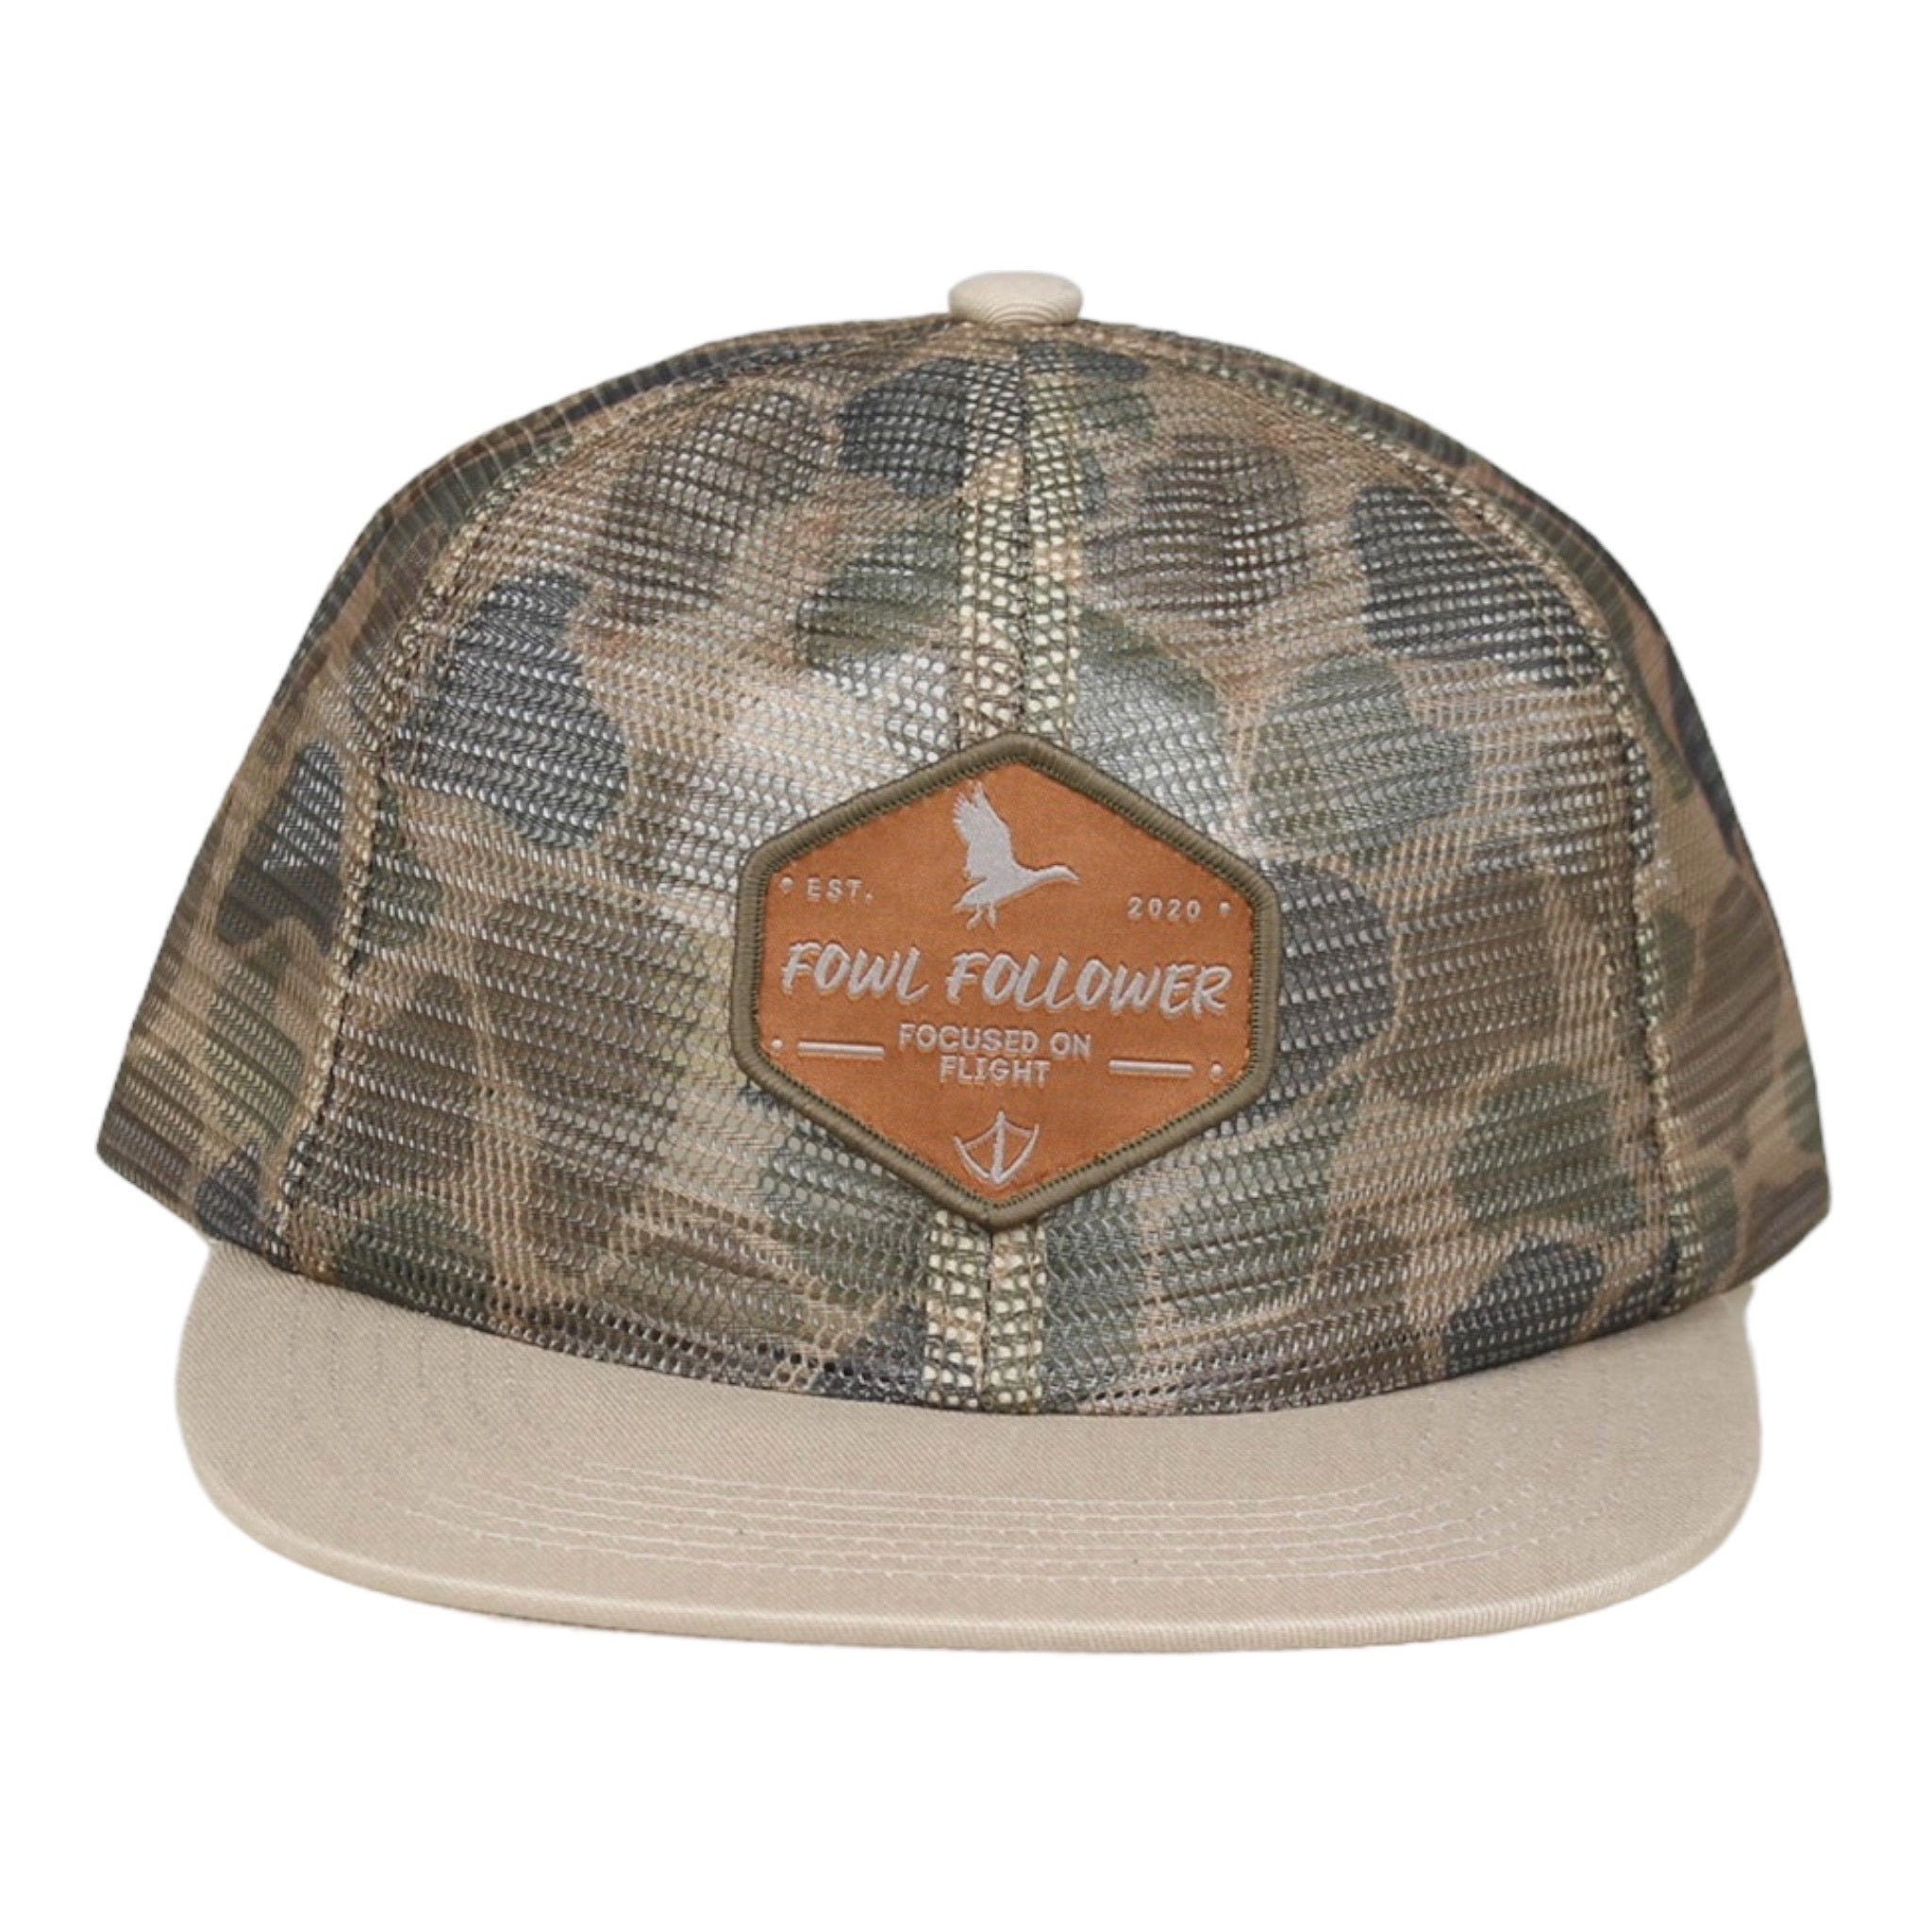 A Fowl Follower Mesh Camo Hat with a leather patch on the front.